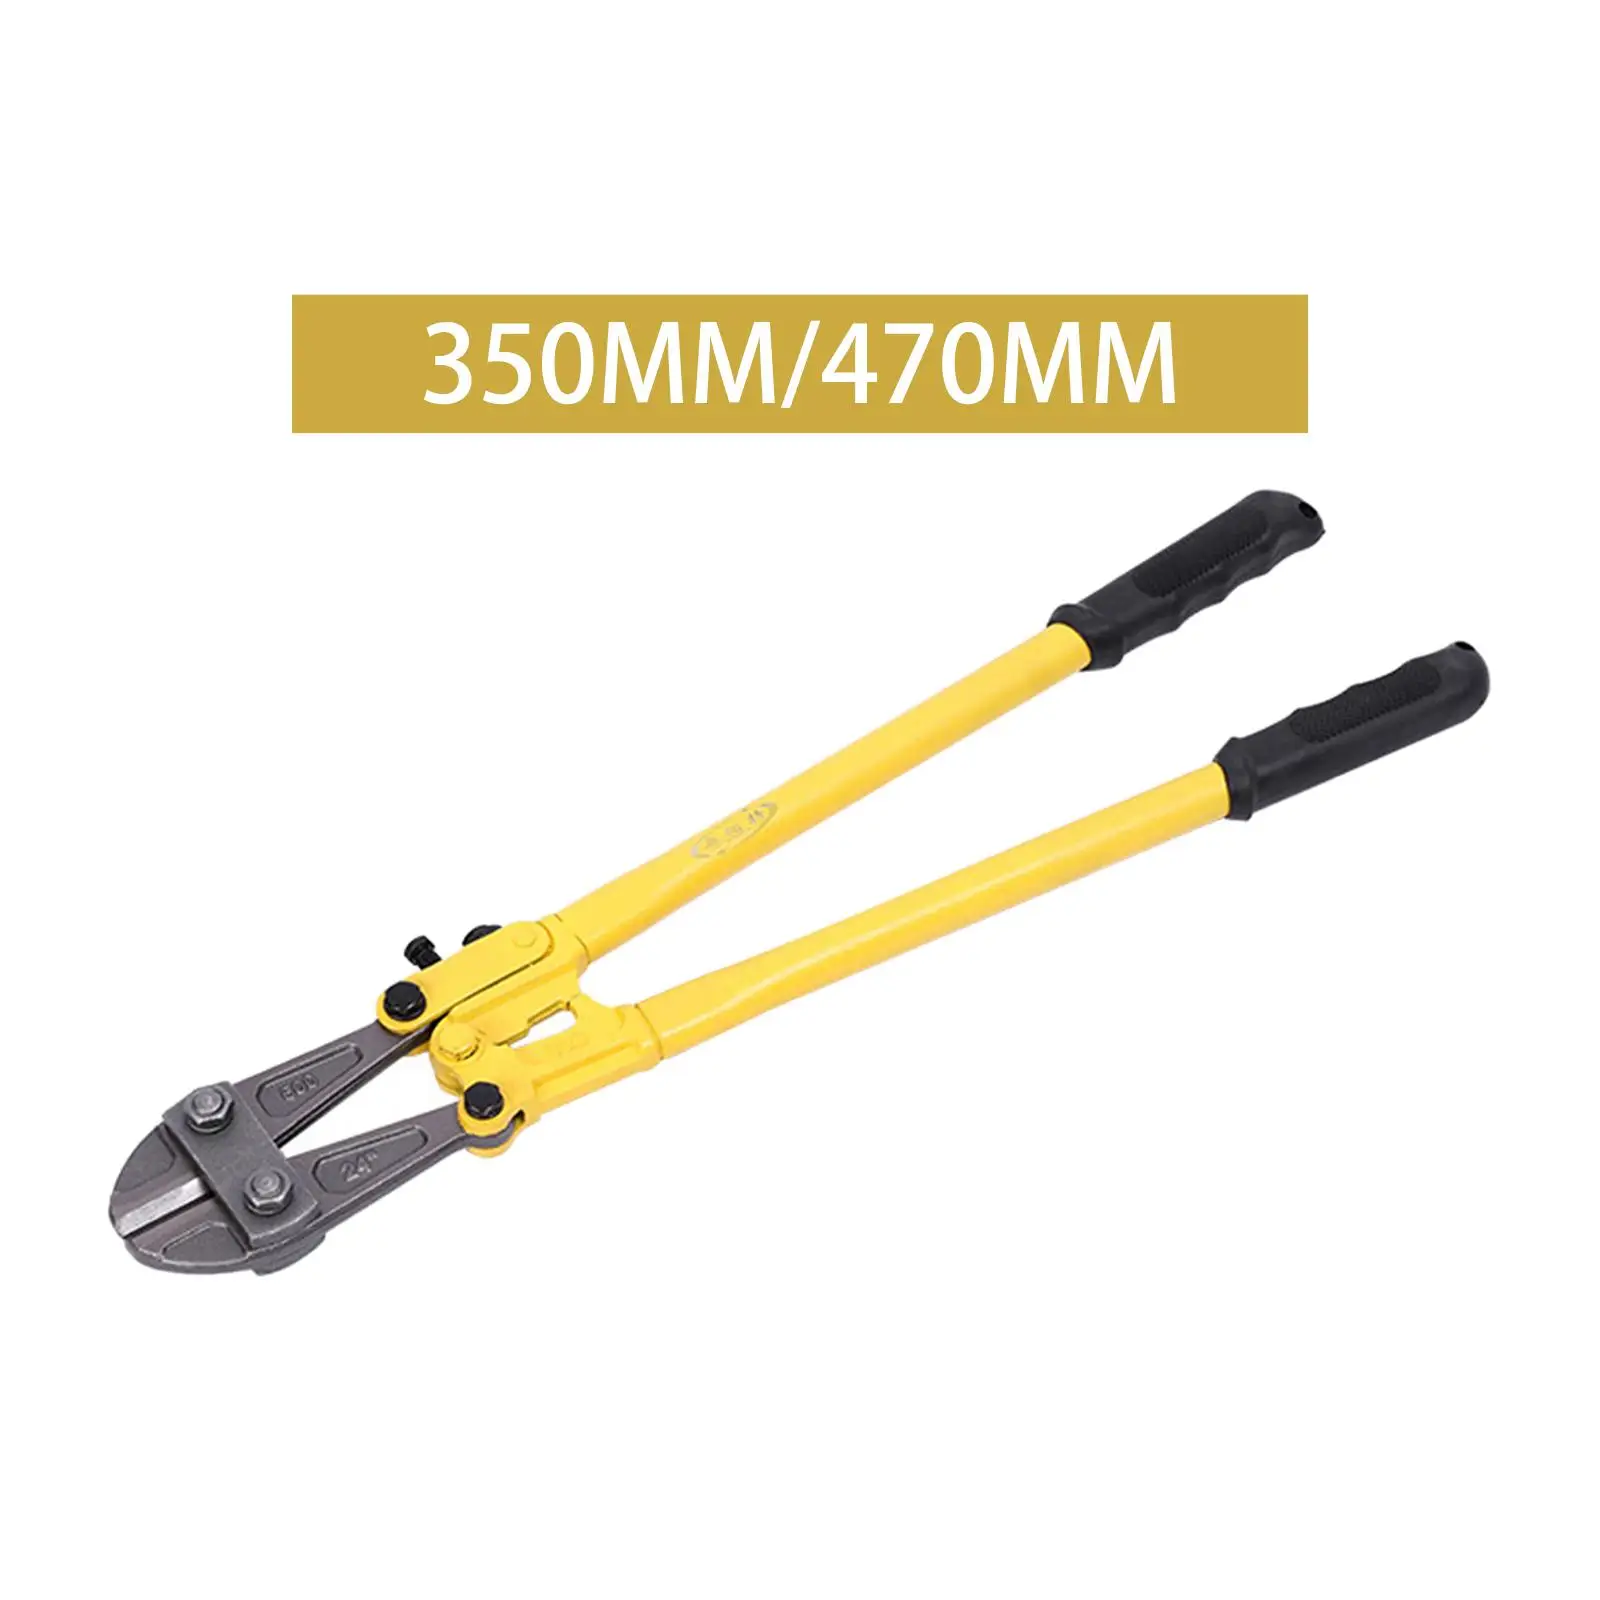 Bolt Cutter with Comfort Grip Forged T8 Steel Blade Heavy Duty Steel Bar Cutter for Locks Rods Screws Wires Chain Link Fence